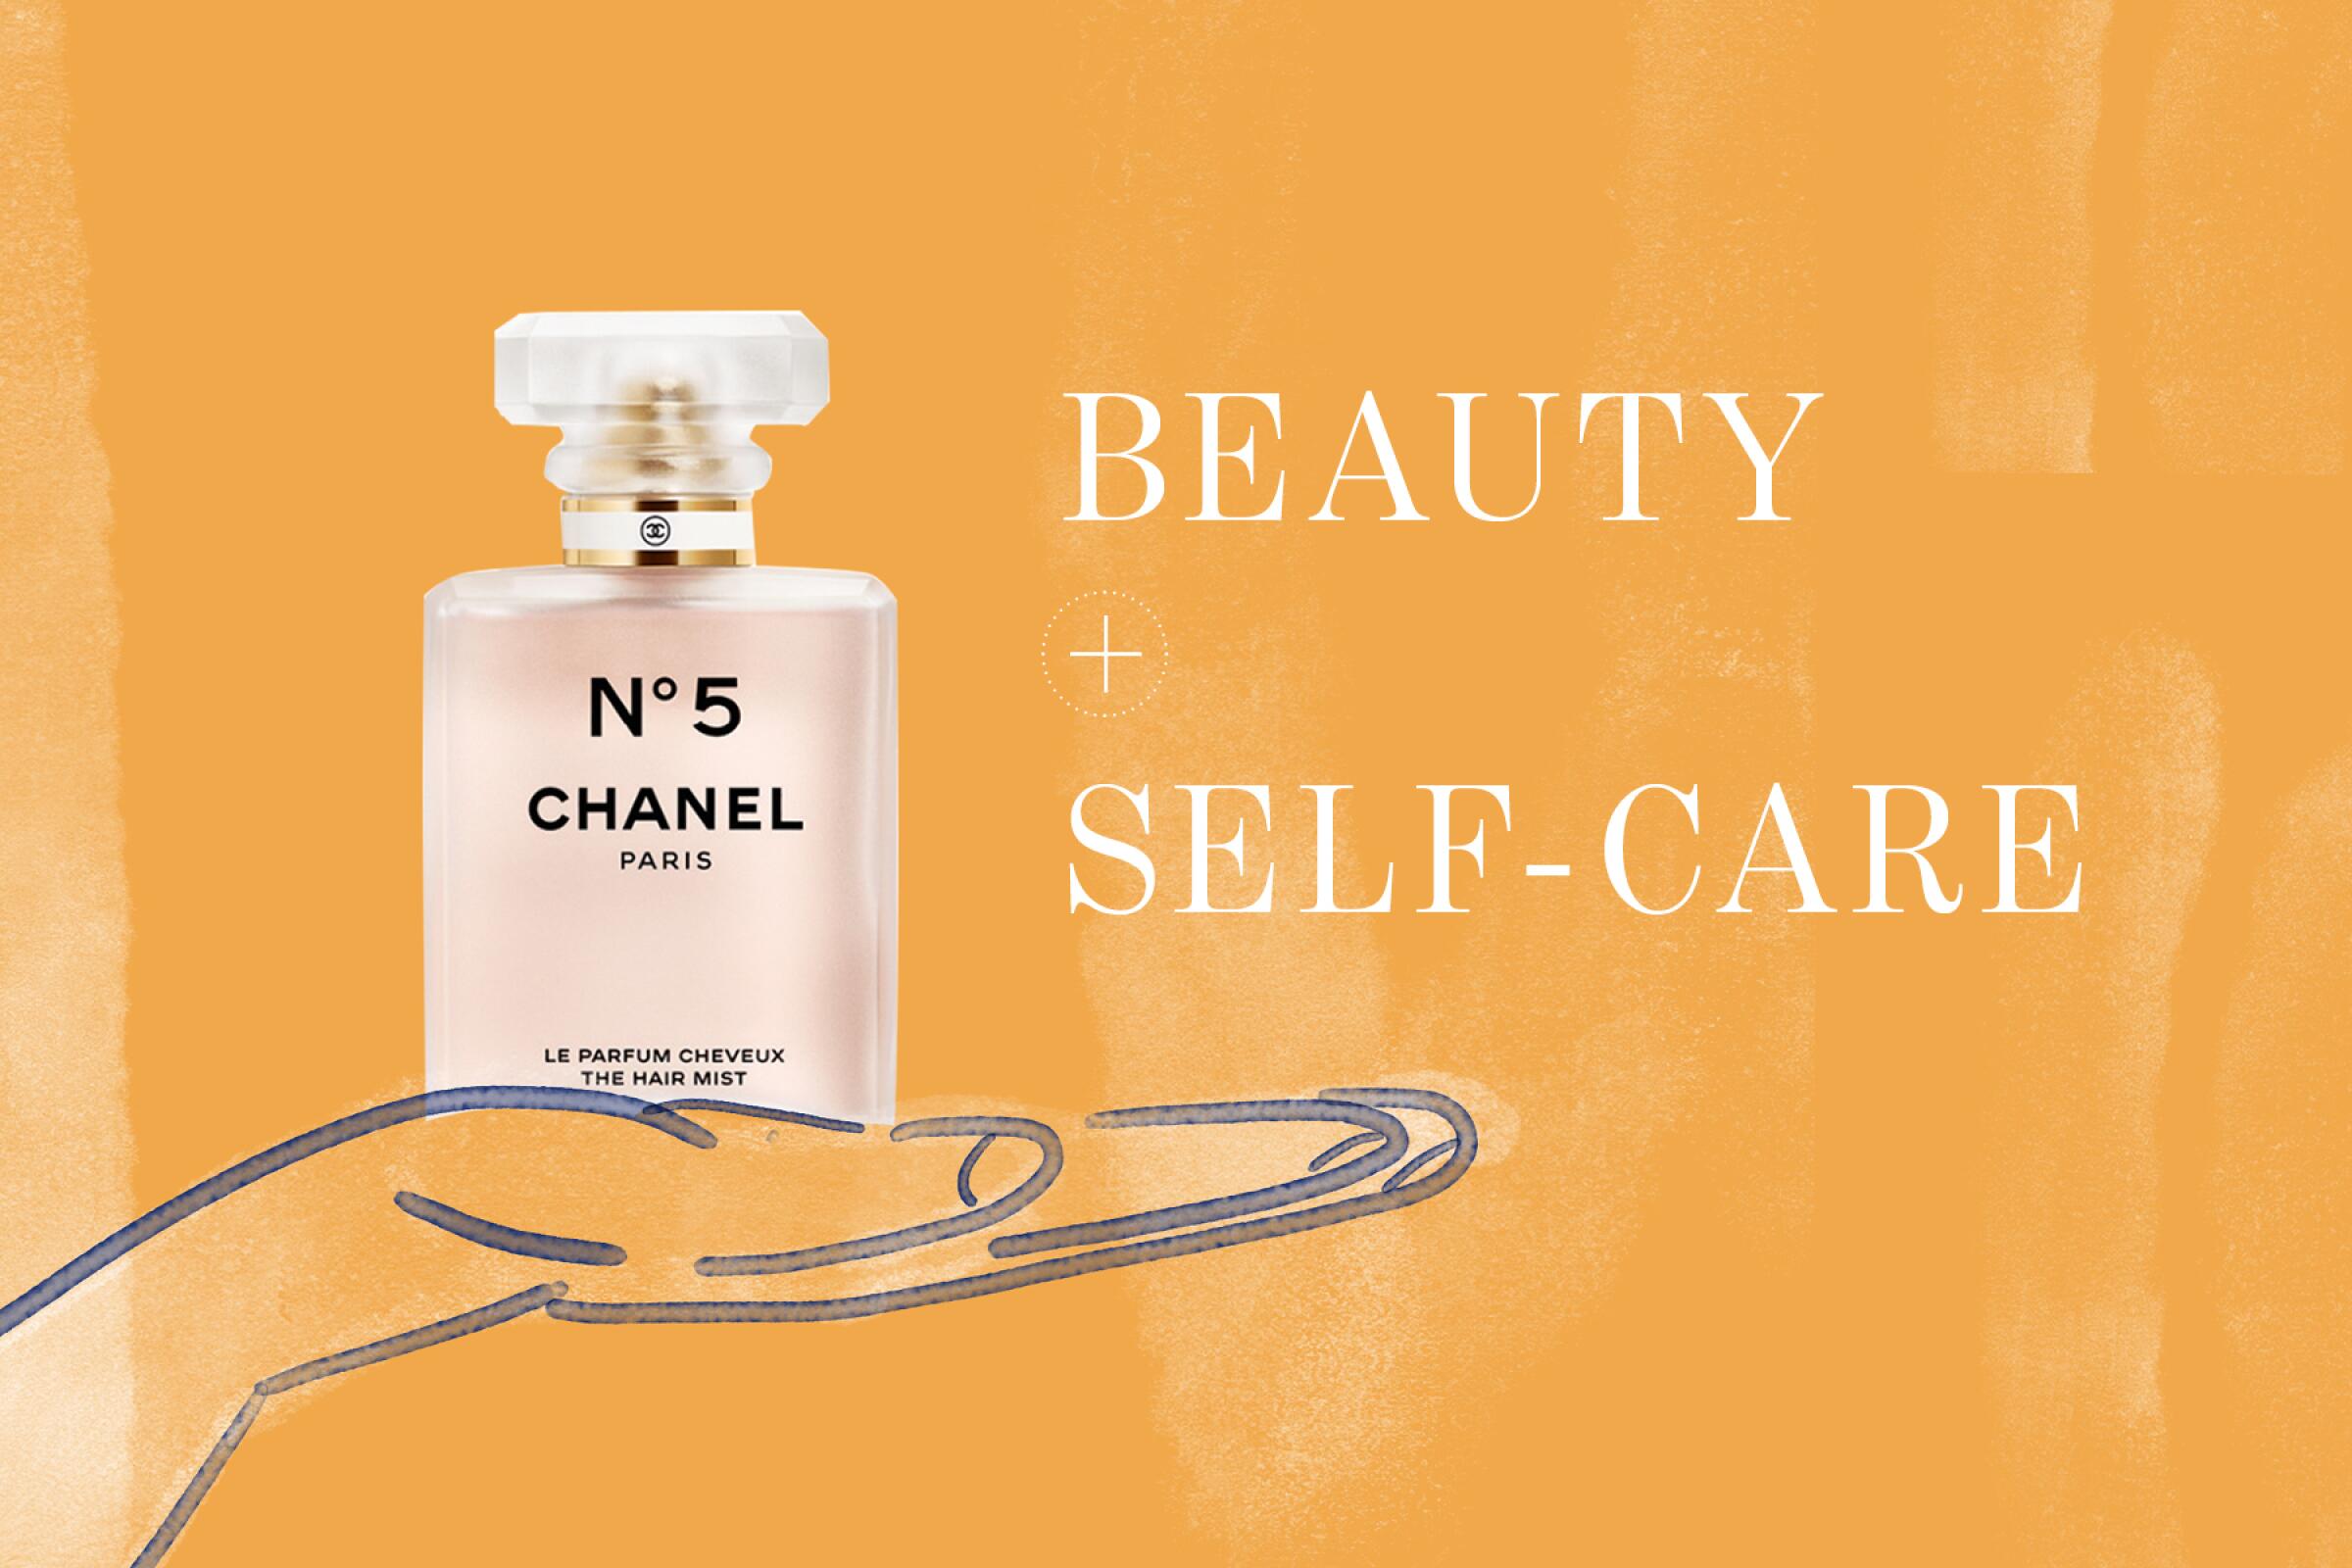 A photo illustration featuring a Chanel No. 5 bottle.